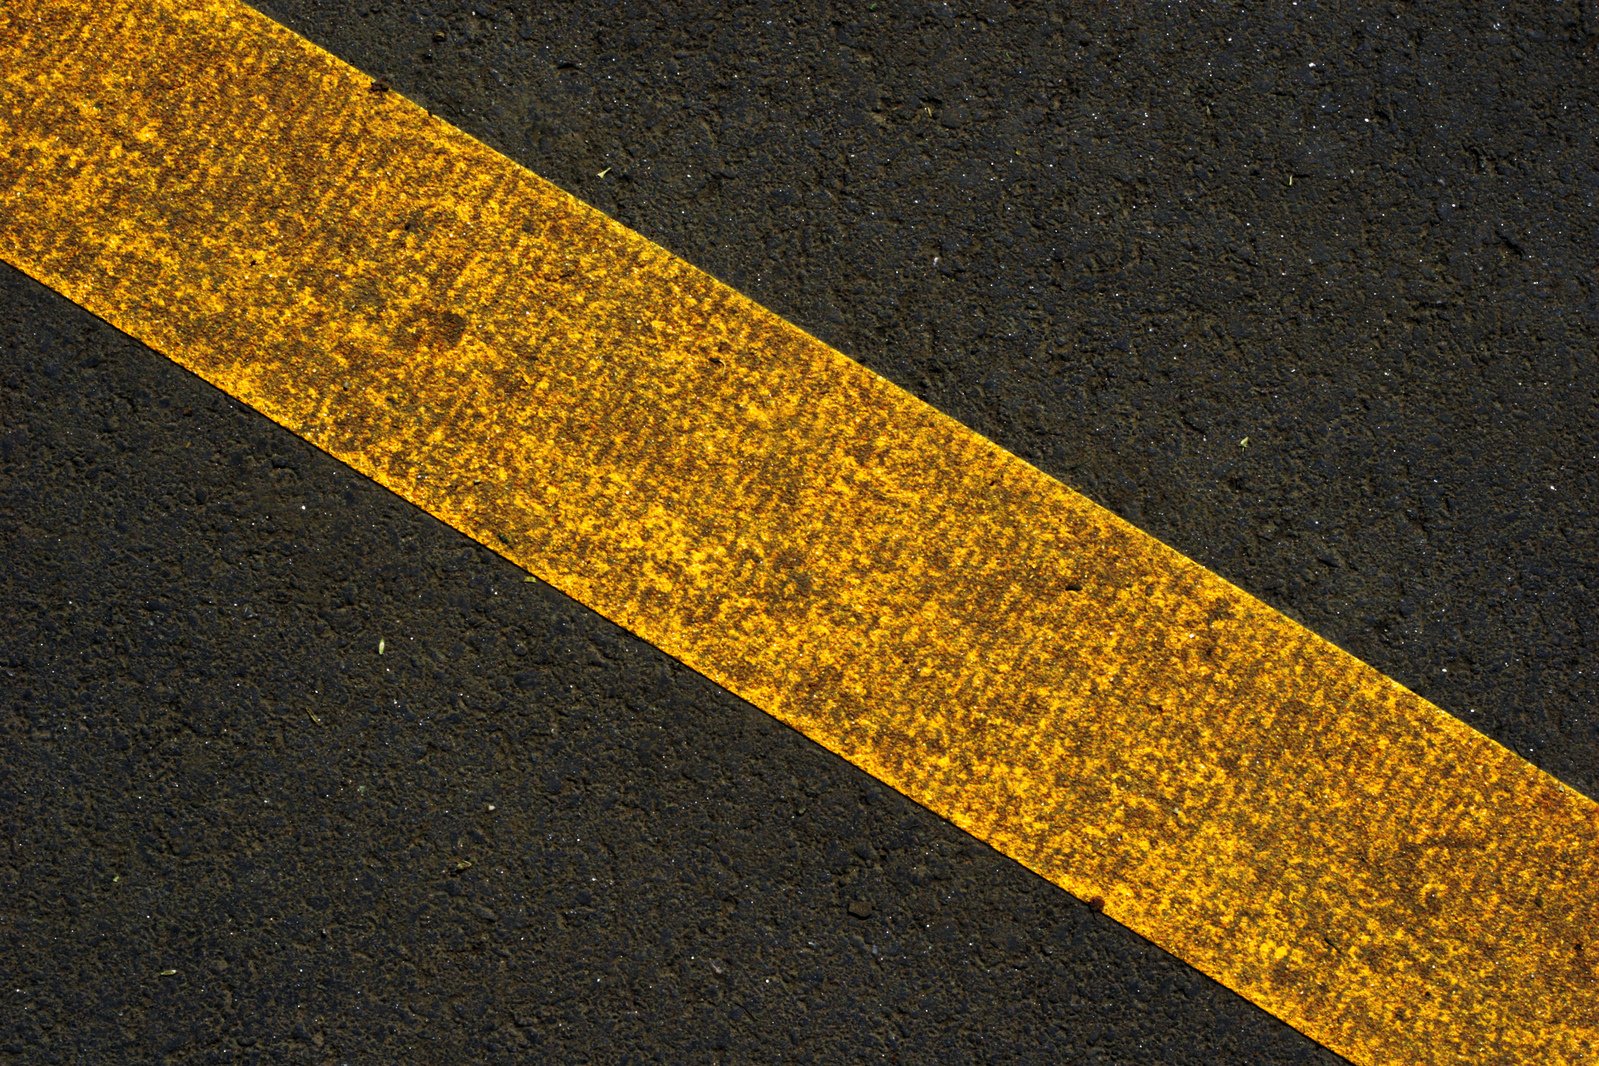 an image of a yellow striped line painted on the road